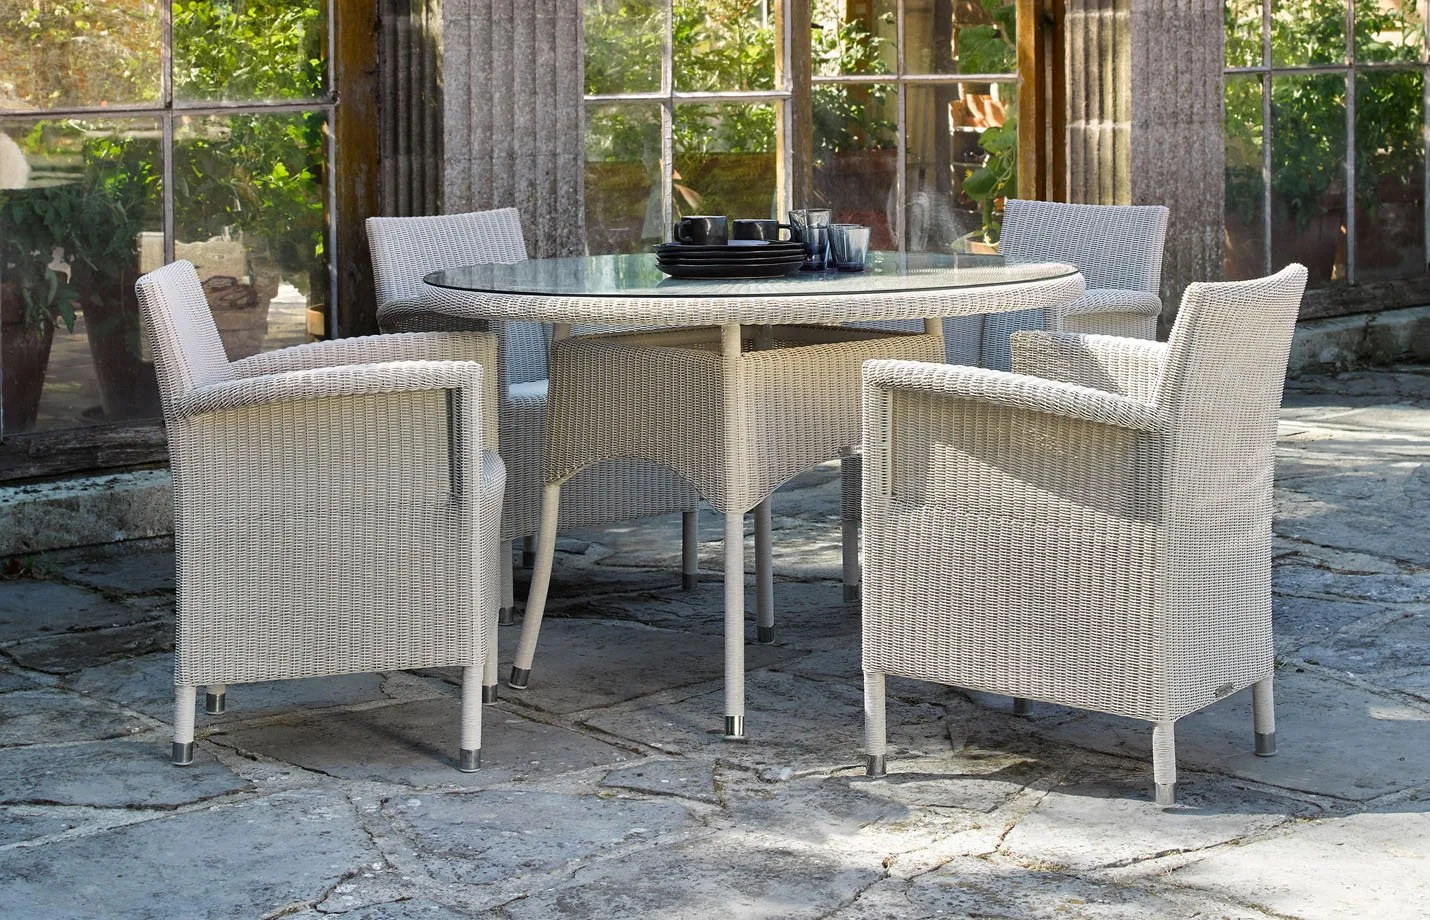 Safi dining table dia120 outdoor LS01